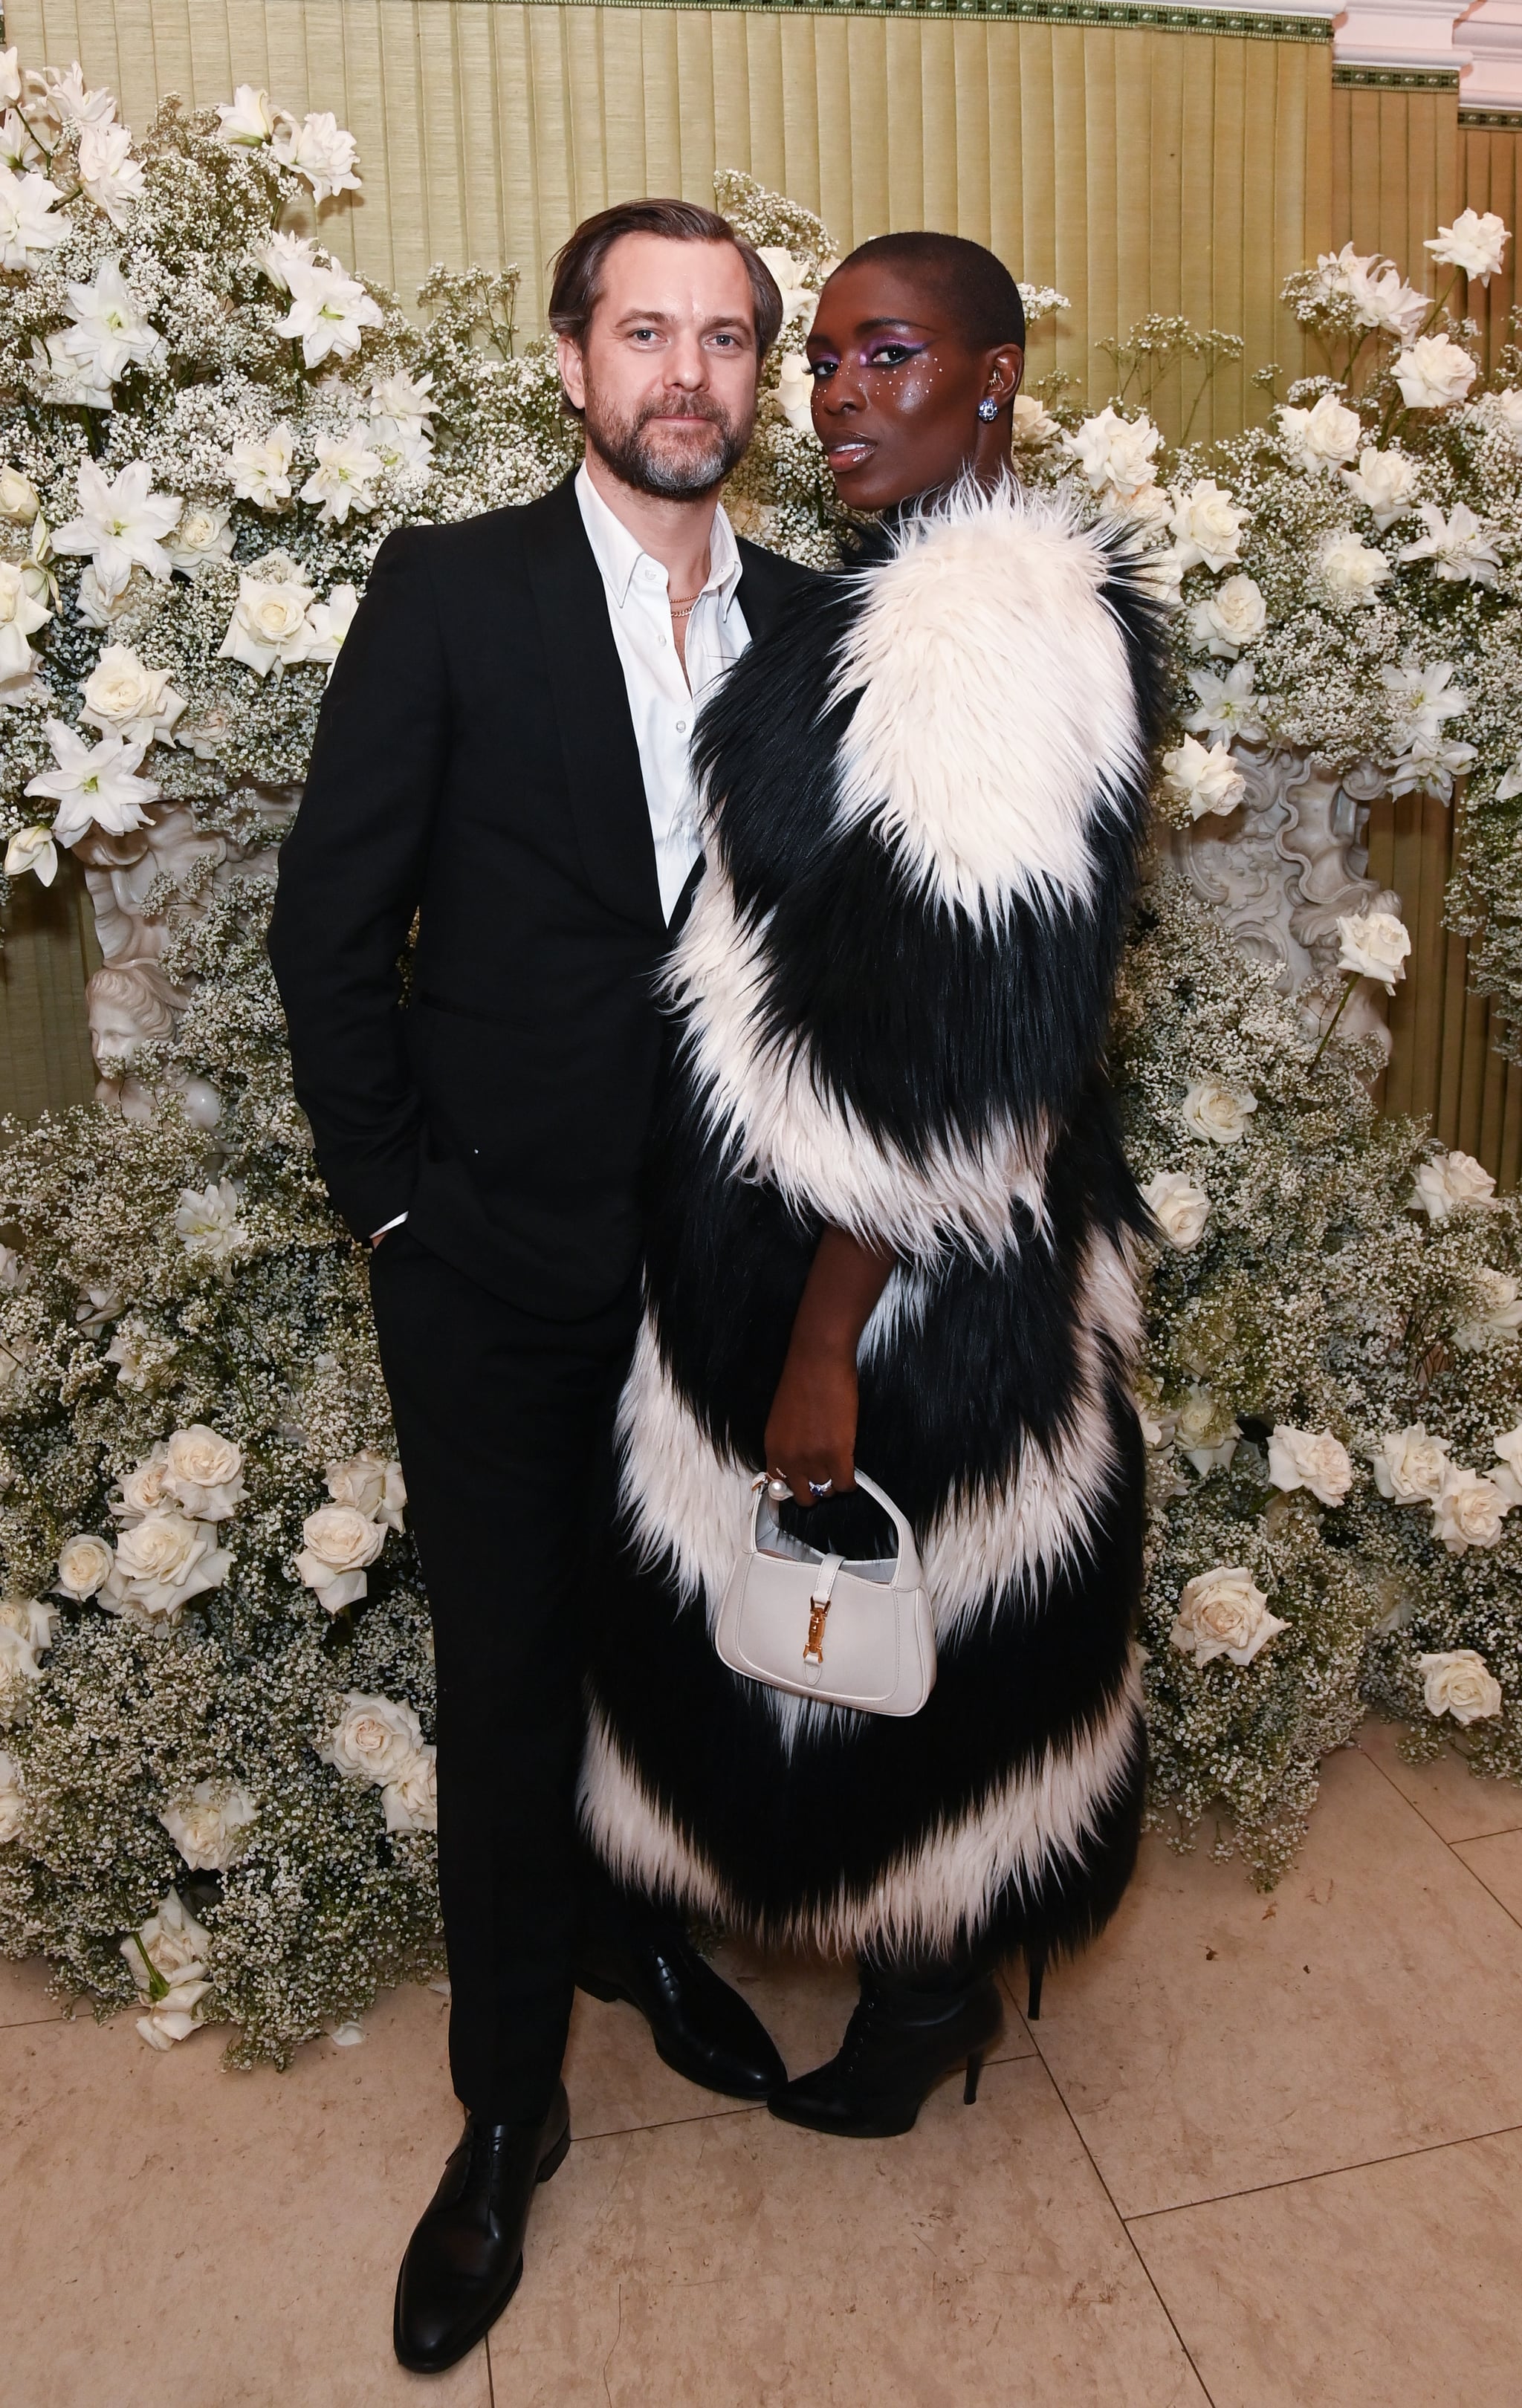 LONDON, ENGLAND - FEBRUARY 19: Joshua Jackson (L) and Jodie Turner-Smith attend the British Vogue And Tiffany & Co. Celebrate Fashion And Film Party 2023 at Annabel's on February 19, 2023 in London, England. (Photo by David M. Benett/Dave Benett/Getty Images)